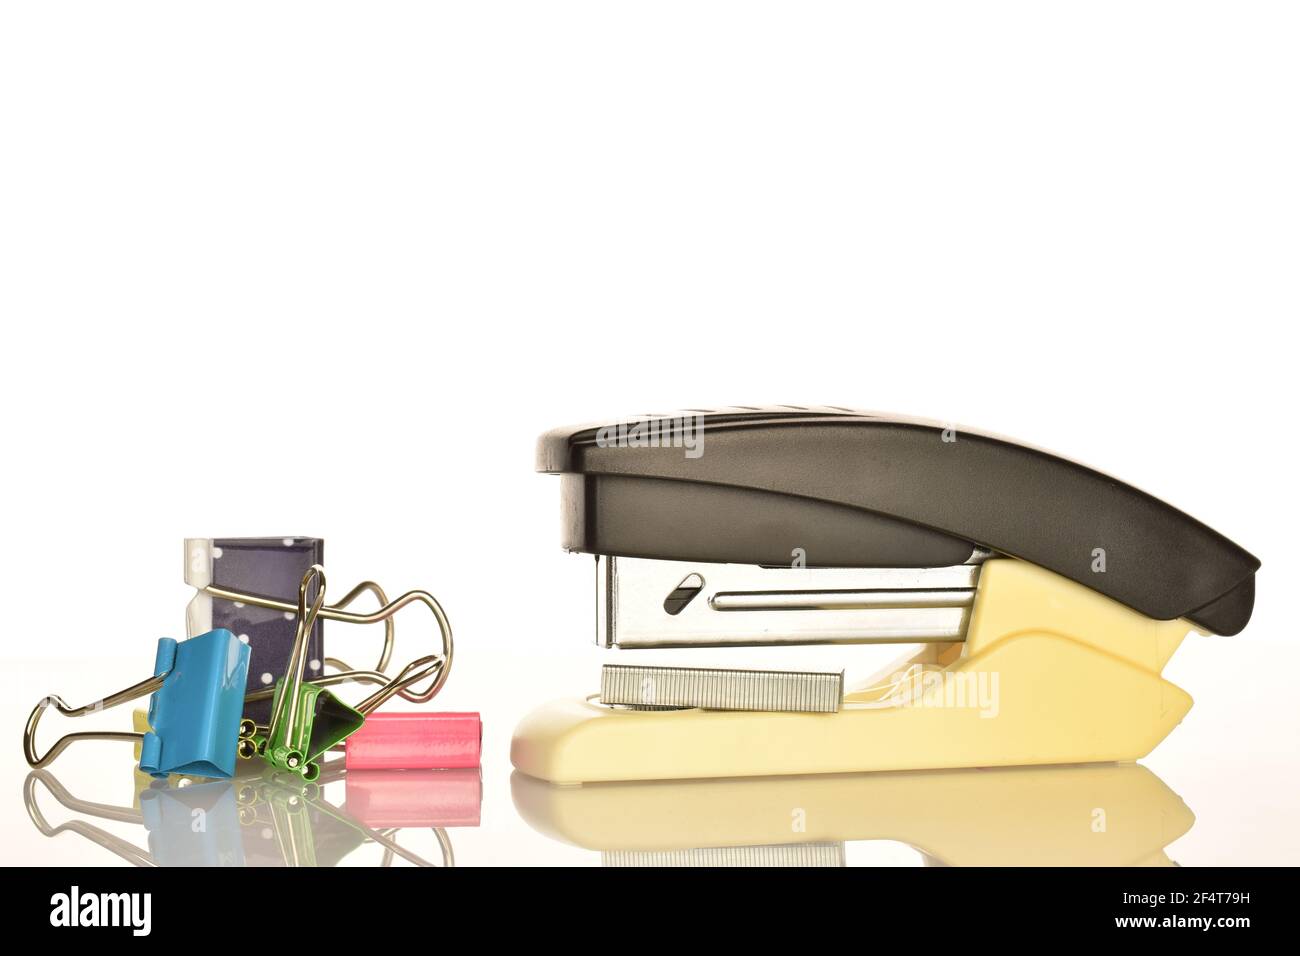 One stationery stapler and several binders on a white background. Stock Photo